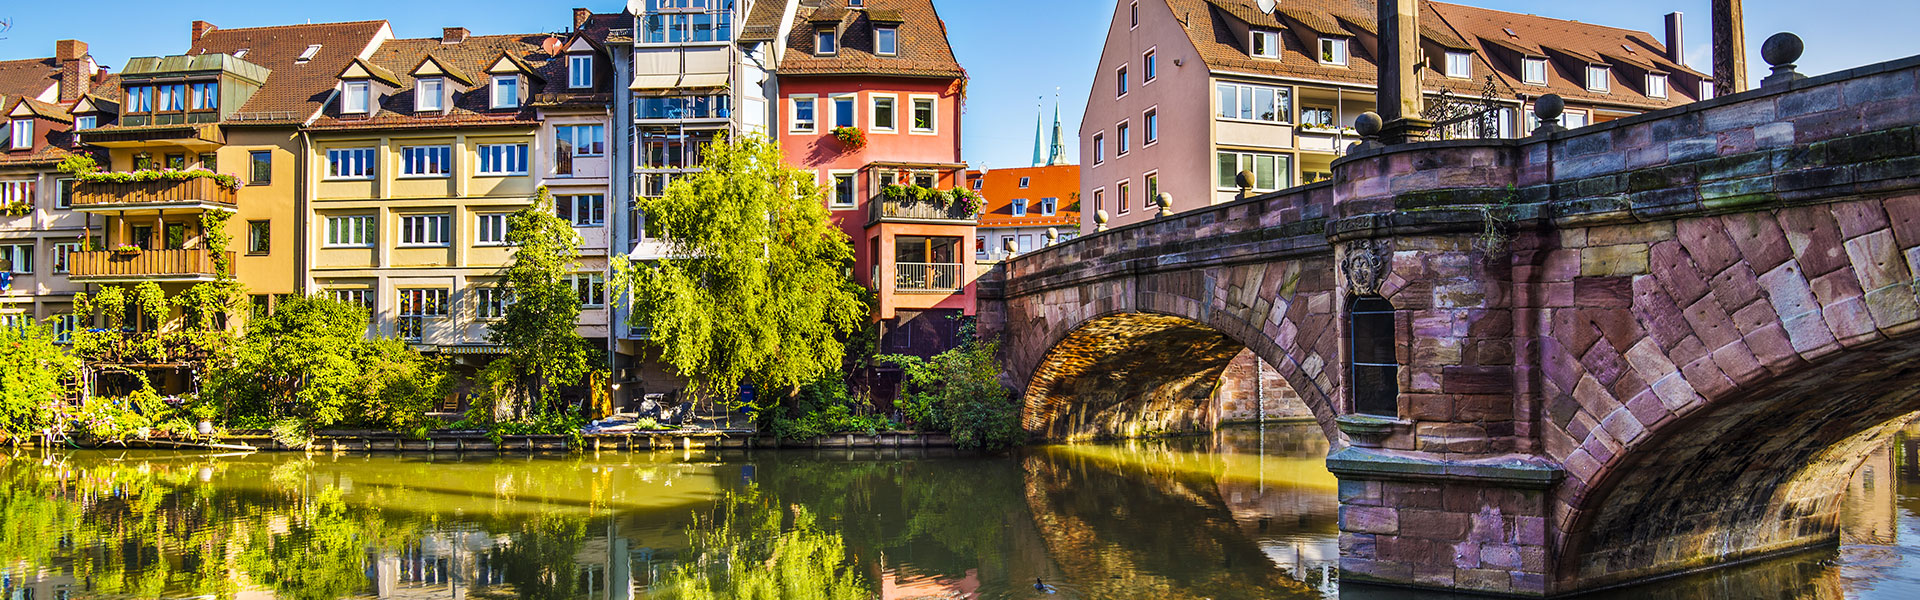 riviera river cruise medieval germany